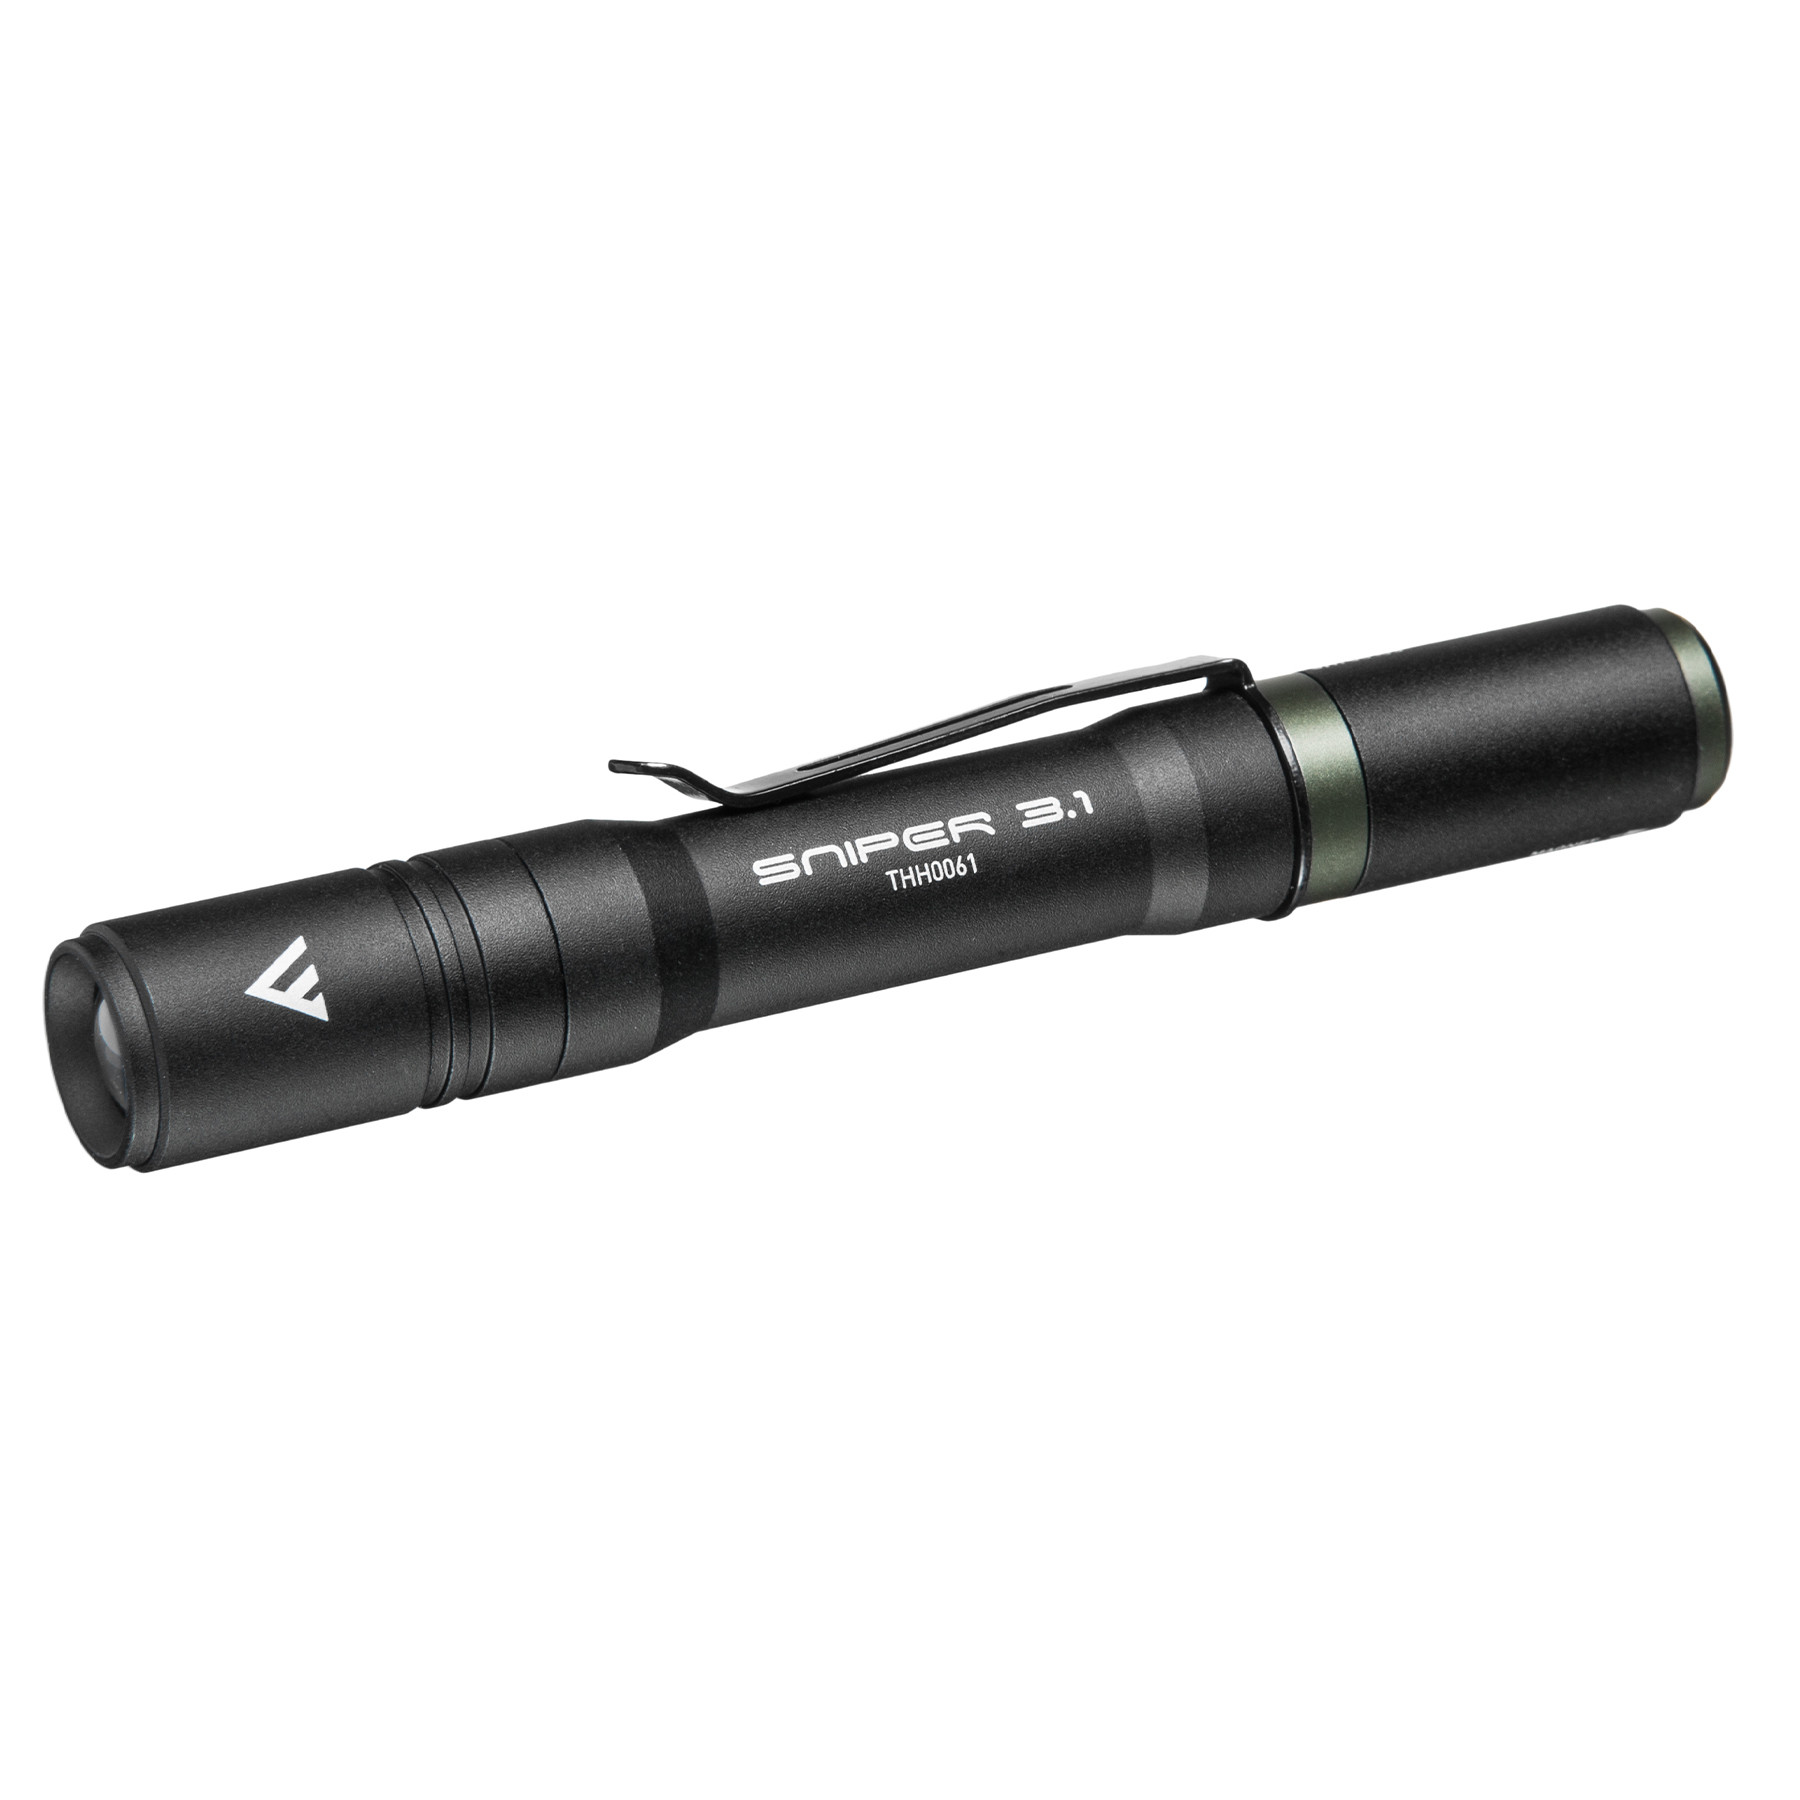 ˳  Mactronic Sniper 3.1 (130 Lm) USB Rechargeable Magnetic (THH0061)